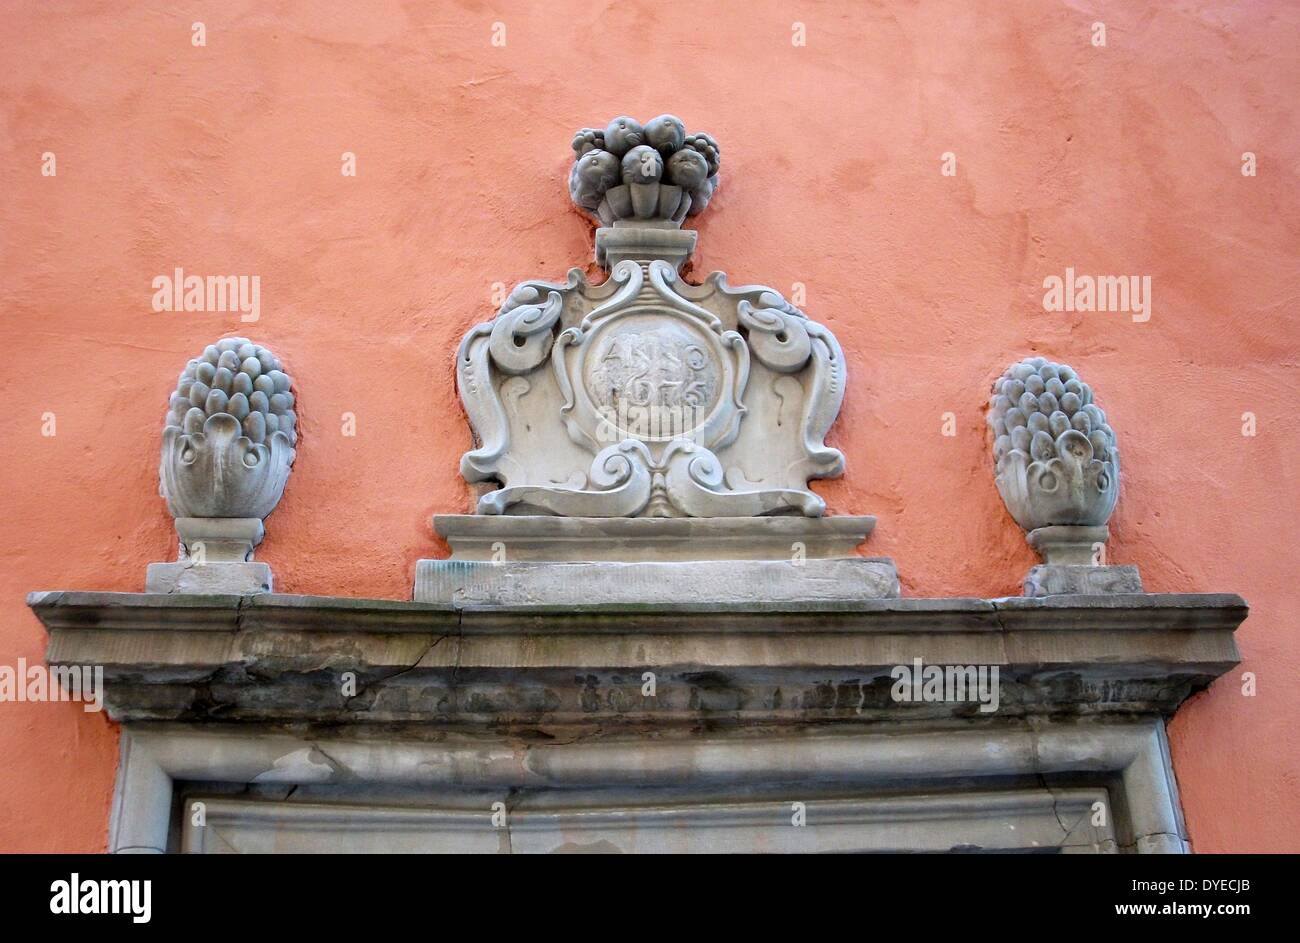 Architectural detail in the old city center, Stockholm, Sweden. 2012 Stock Photo